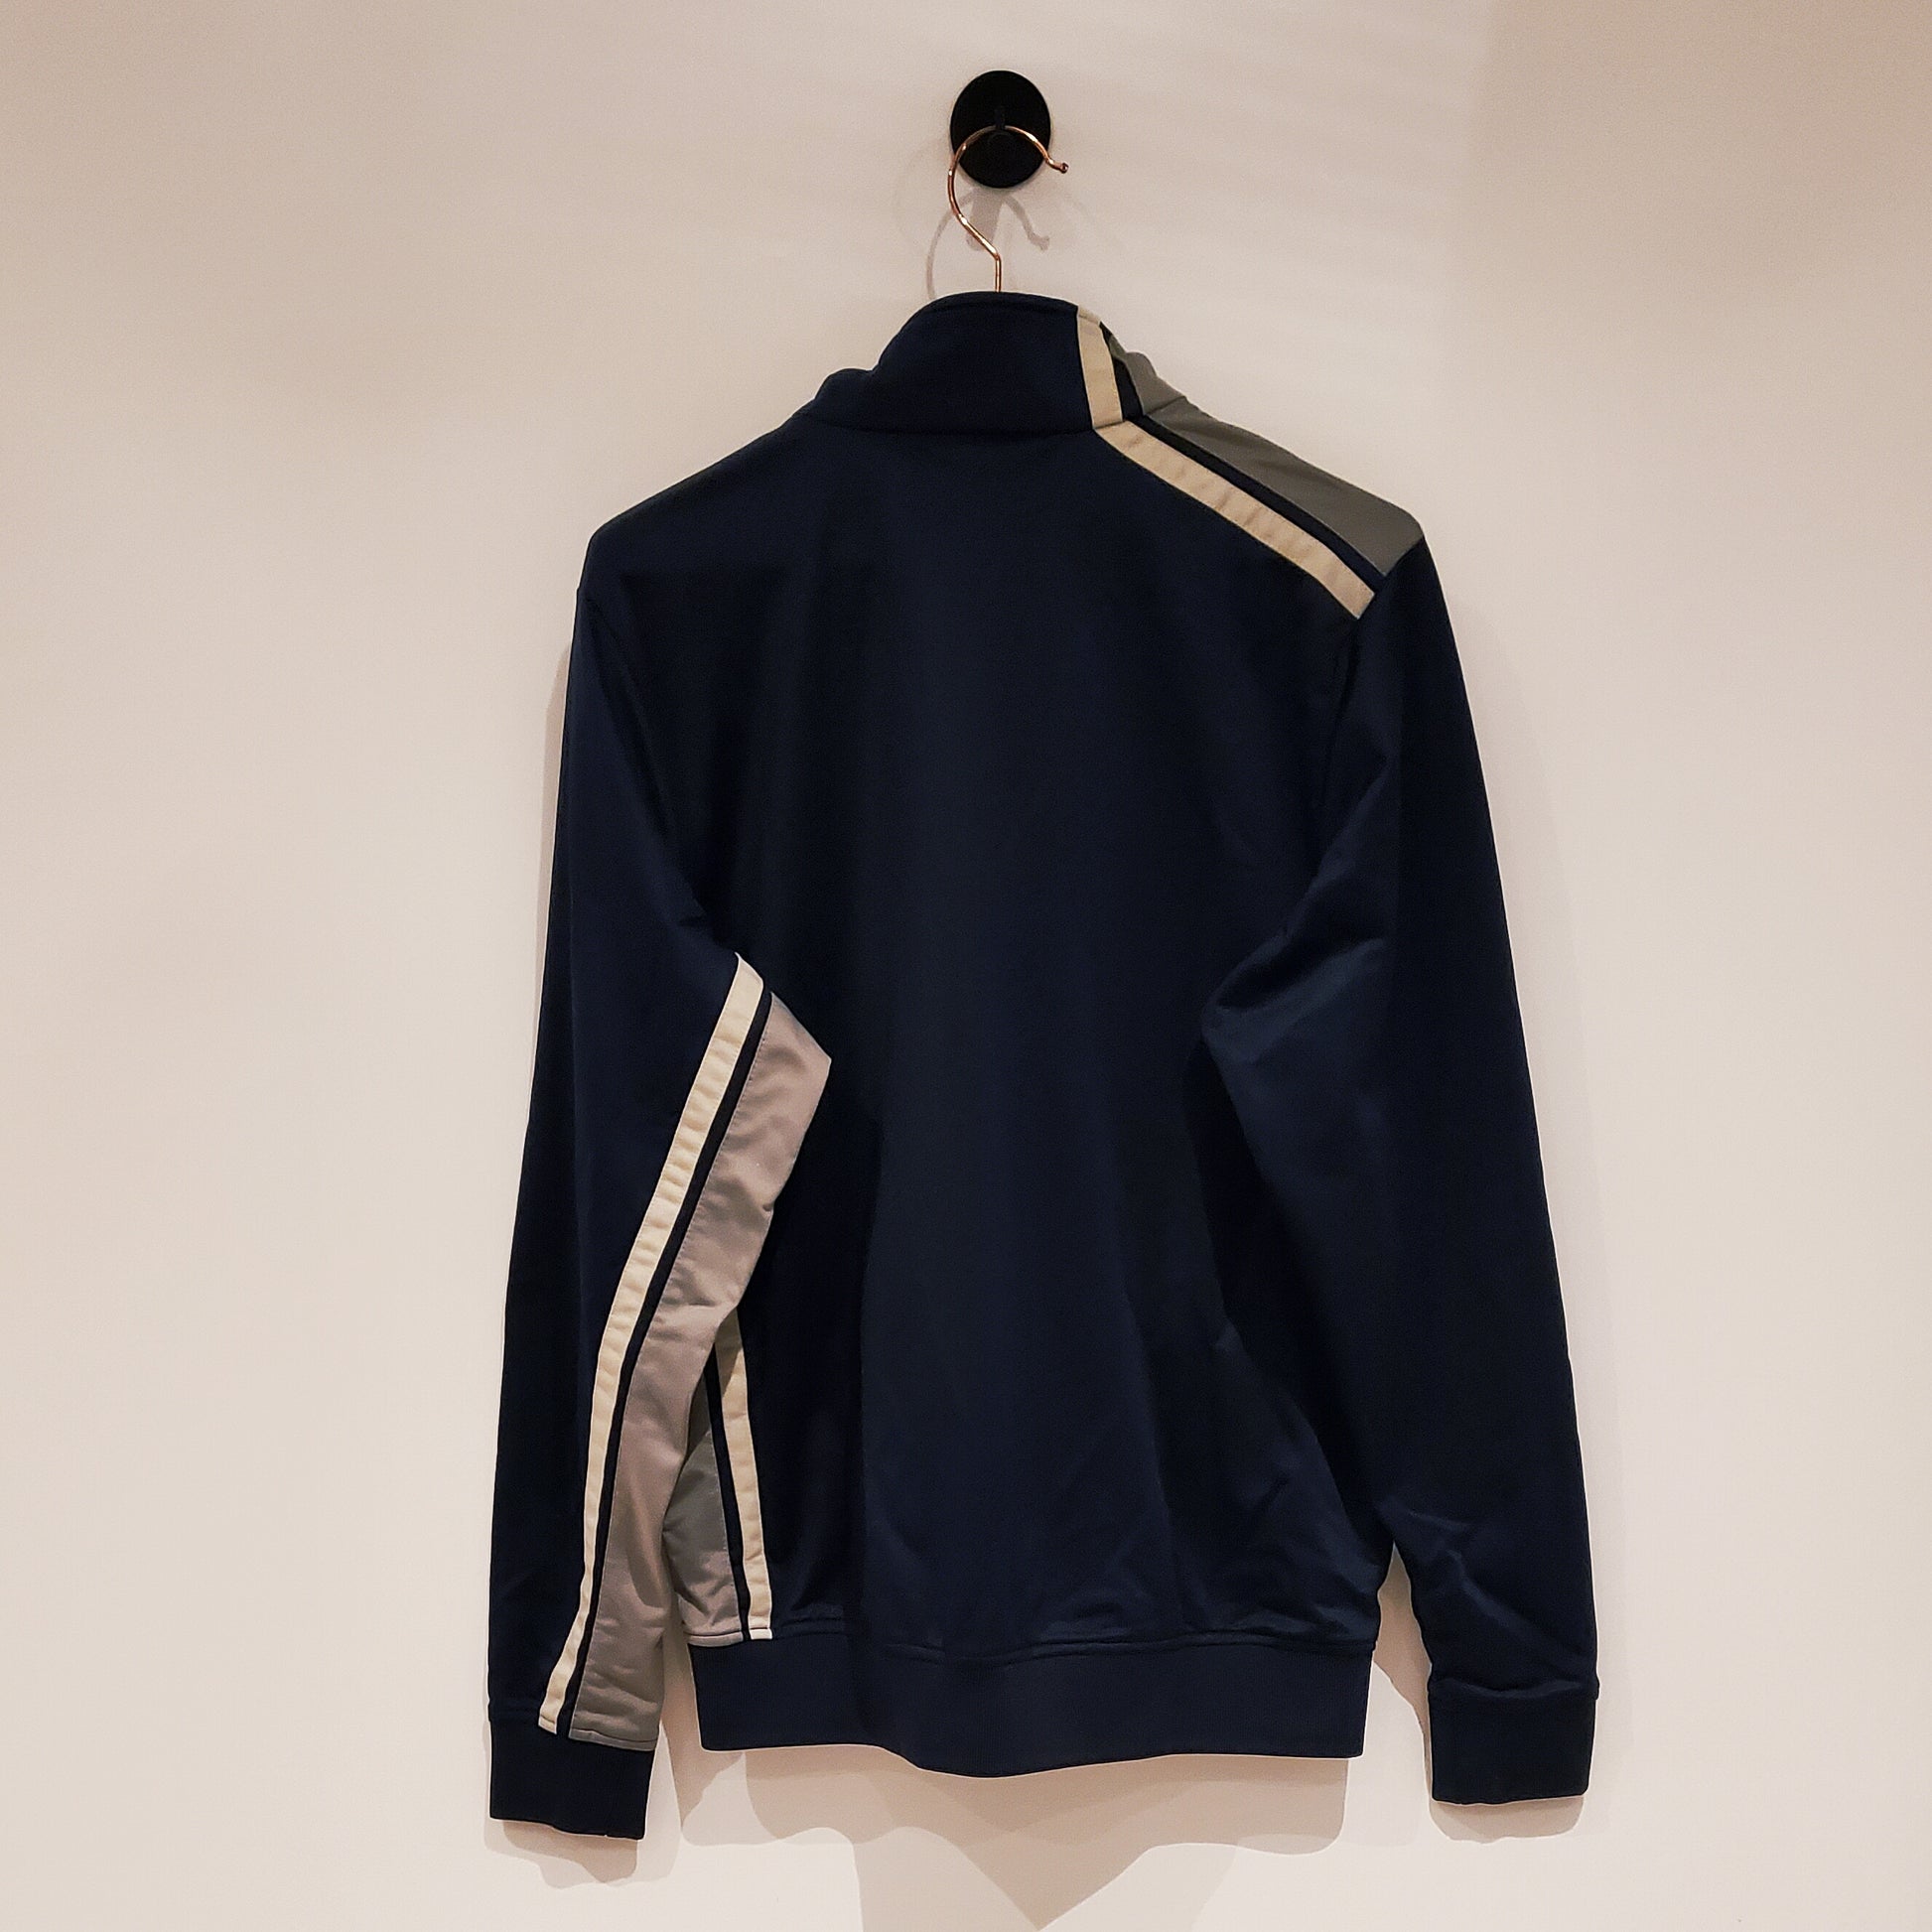 90s Kappa Track Top Navy Size Small